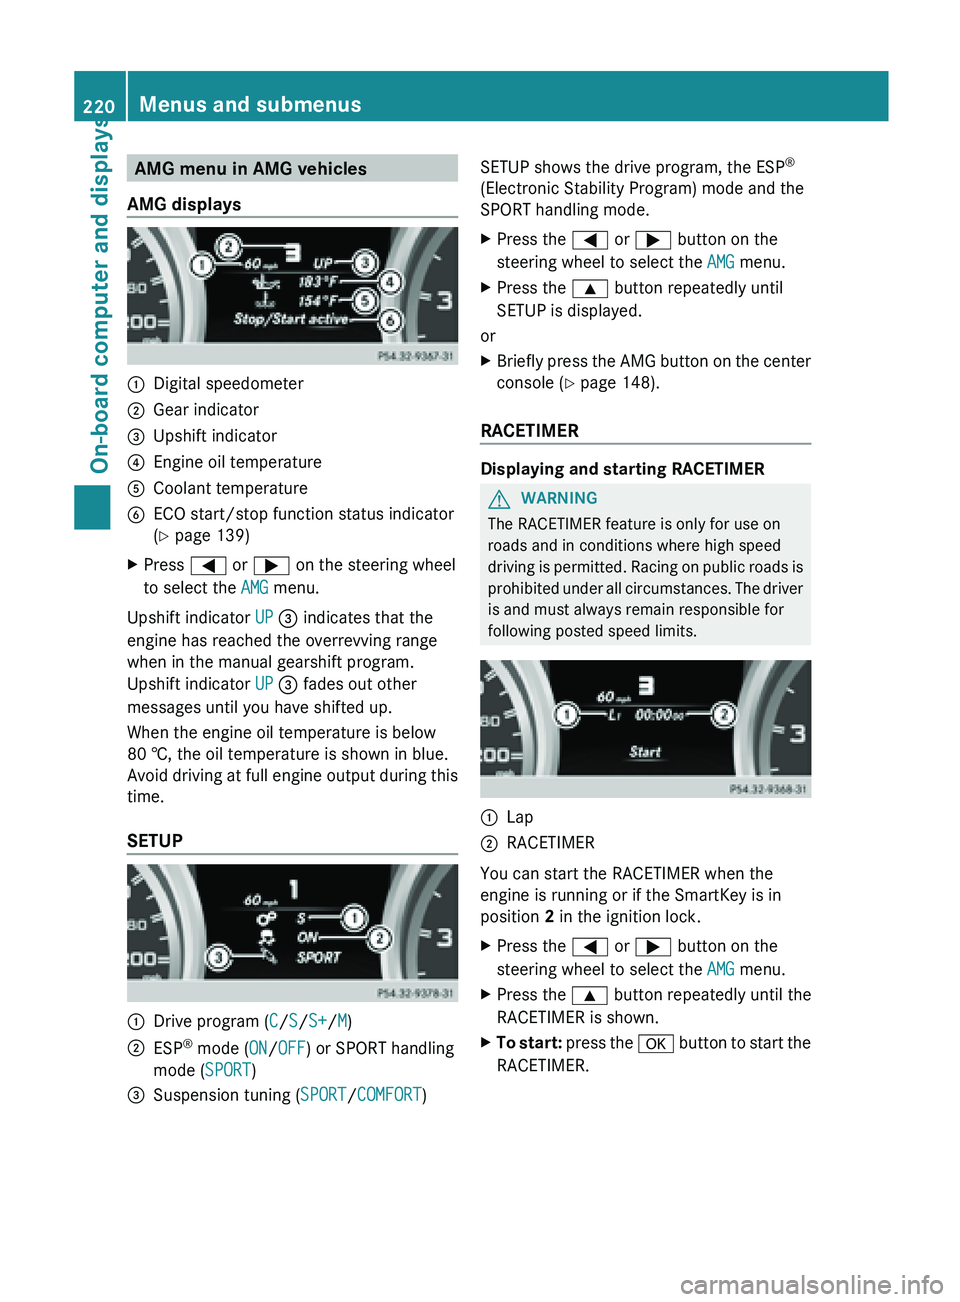 MERCEDES-BENZ SL-CLASS ROADSTER 2013 Manual PDF AMG menu in AMG vehicles
AMG displays :
Digital speedometer
; Gear indicator
= Upshift indicator
? Engine oil temperature
A Coolant temperature
B ECO start/stop function status indicator
( Y page 139)